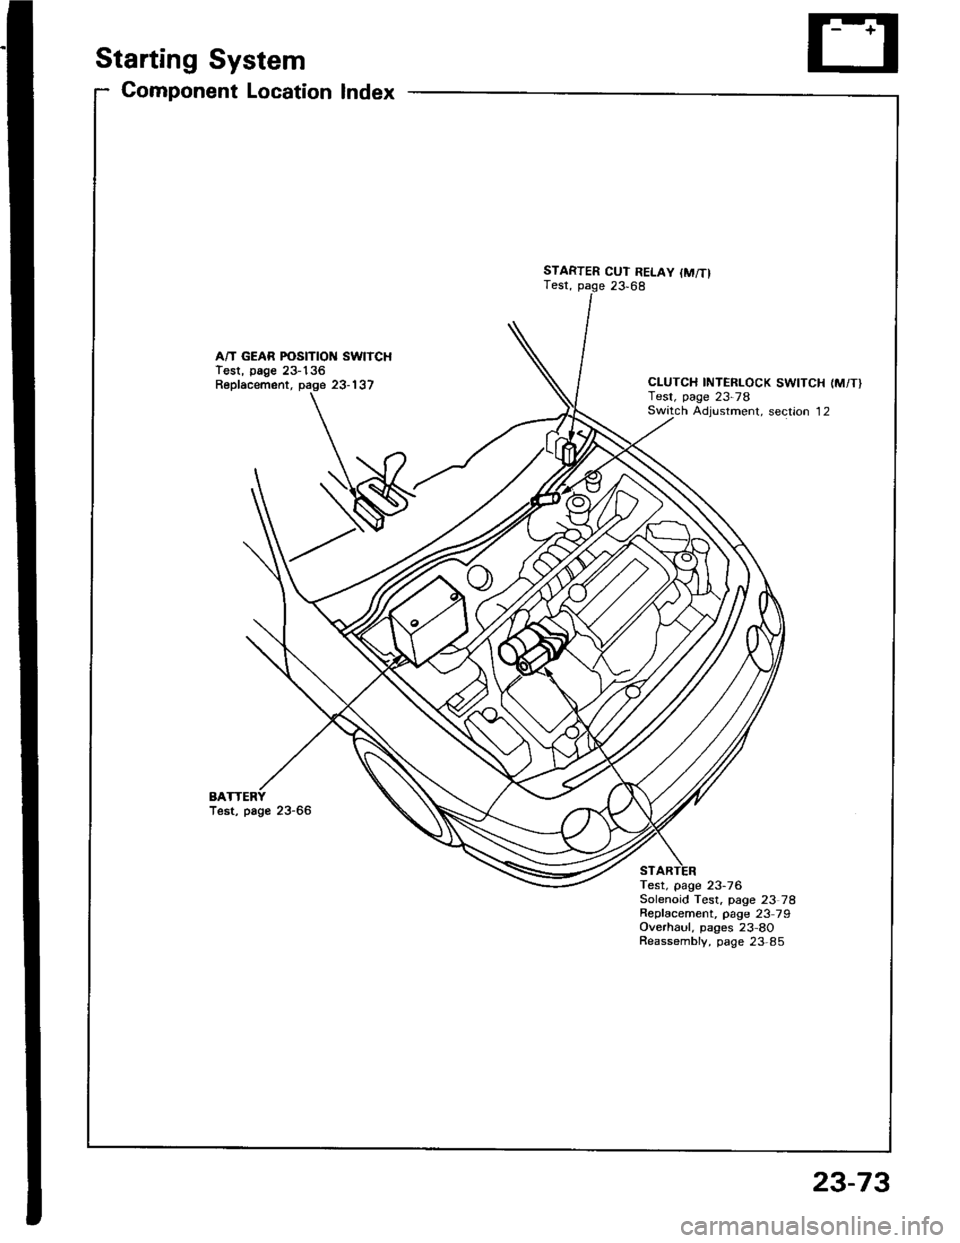 ACURA INTEGRA 1994  Service Service Manual Starting System
Gomponent Location Index
A/T GEAR POSITION SWITCHTest, page 23-136Replacement, page 23-137
BATest, page 23-66
STARTER CUT RELAY {M/T}Test, page 23,68
CLUTCH INTERLOCK SWITCH (M/T}Test,